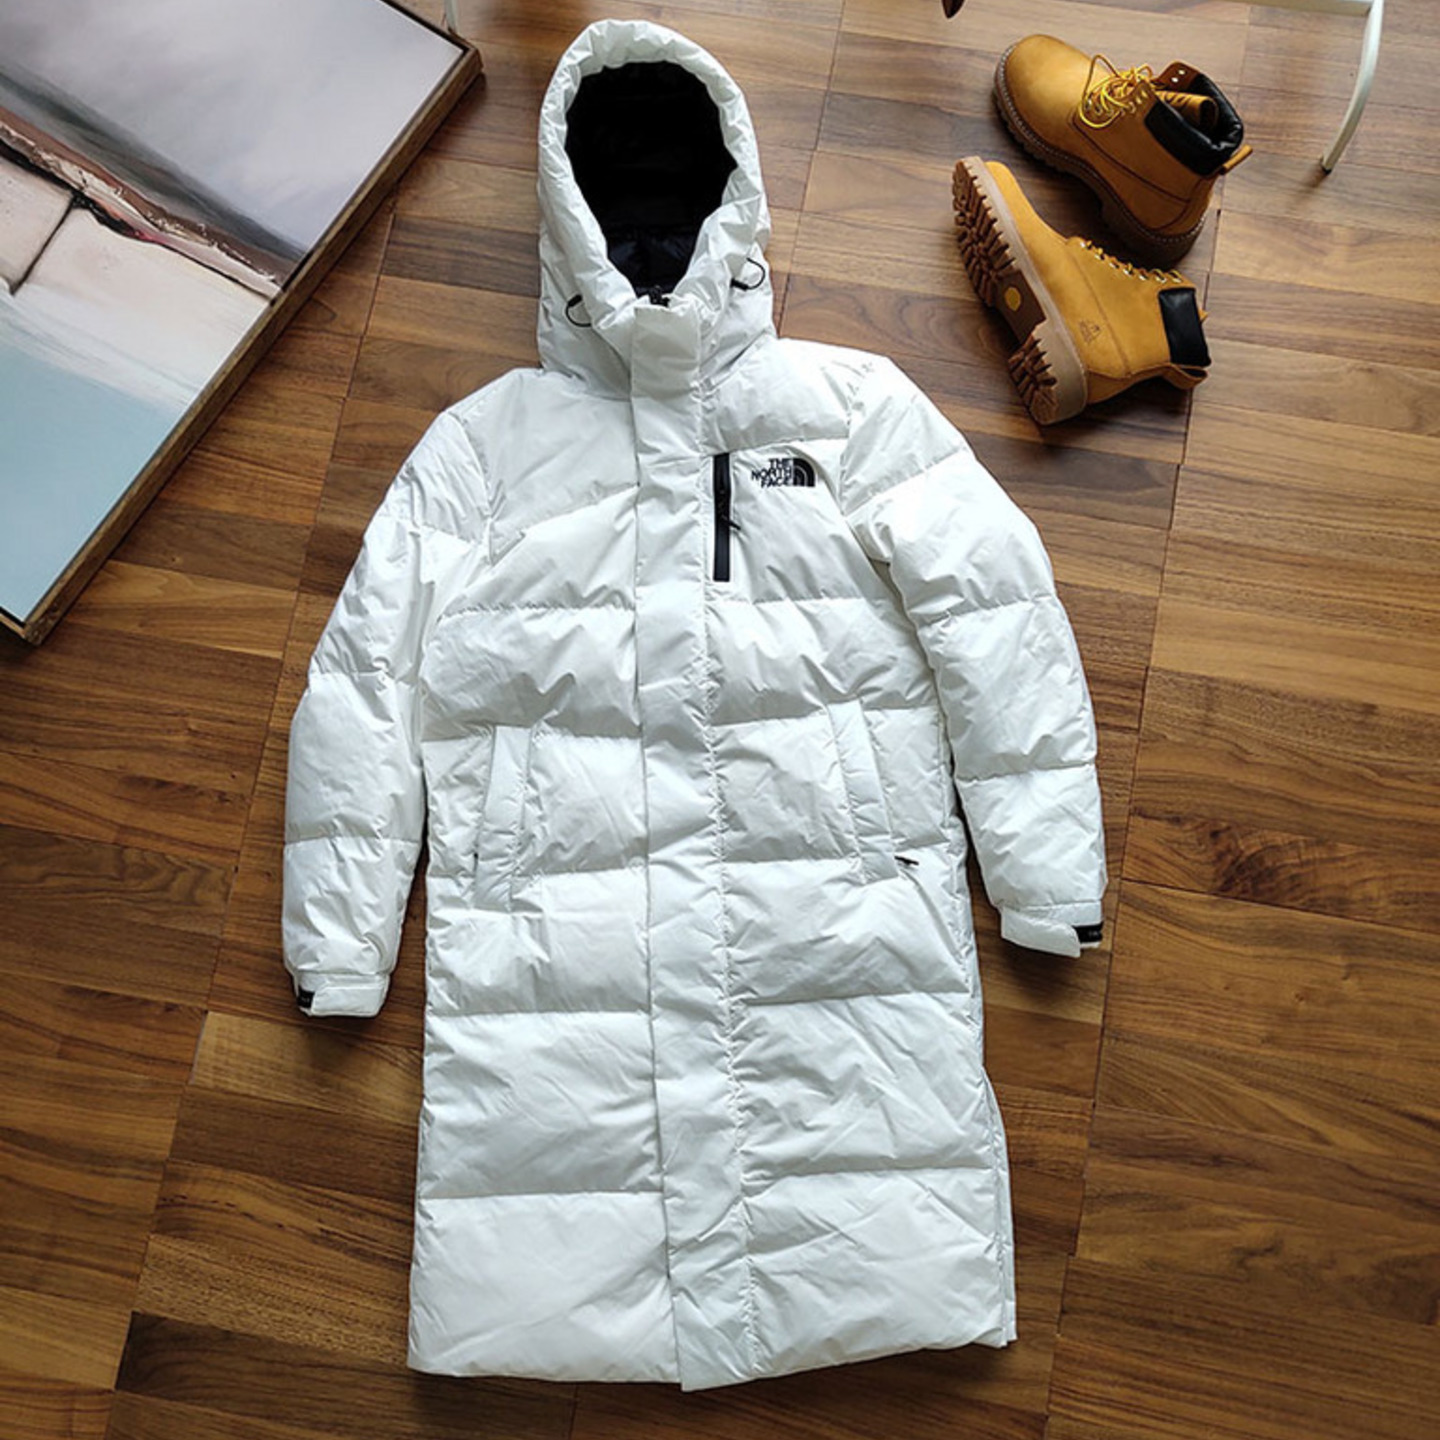 The North Face Long down jacket